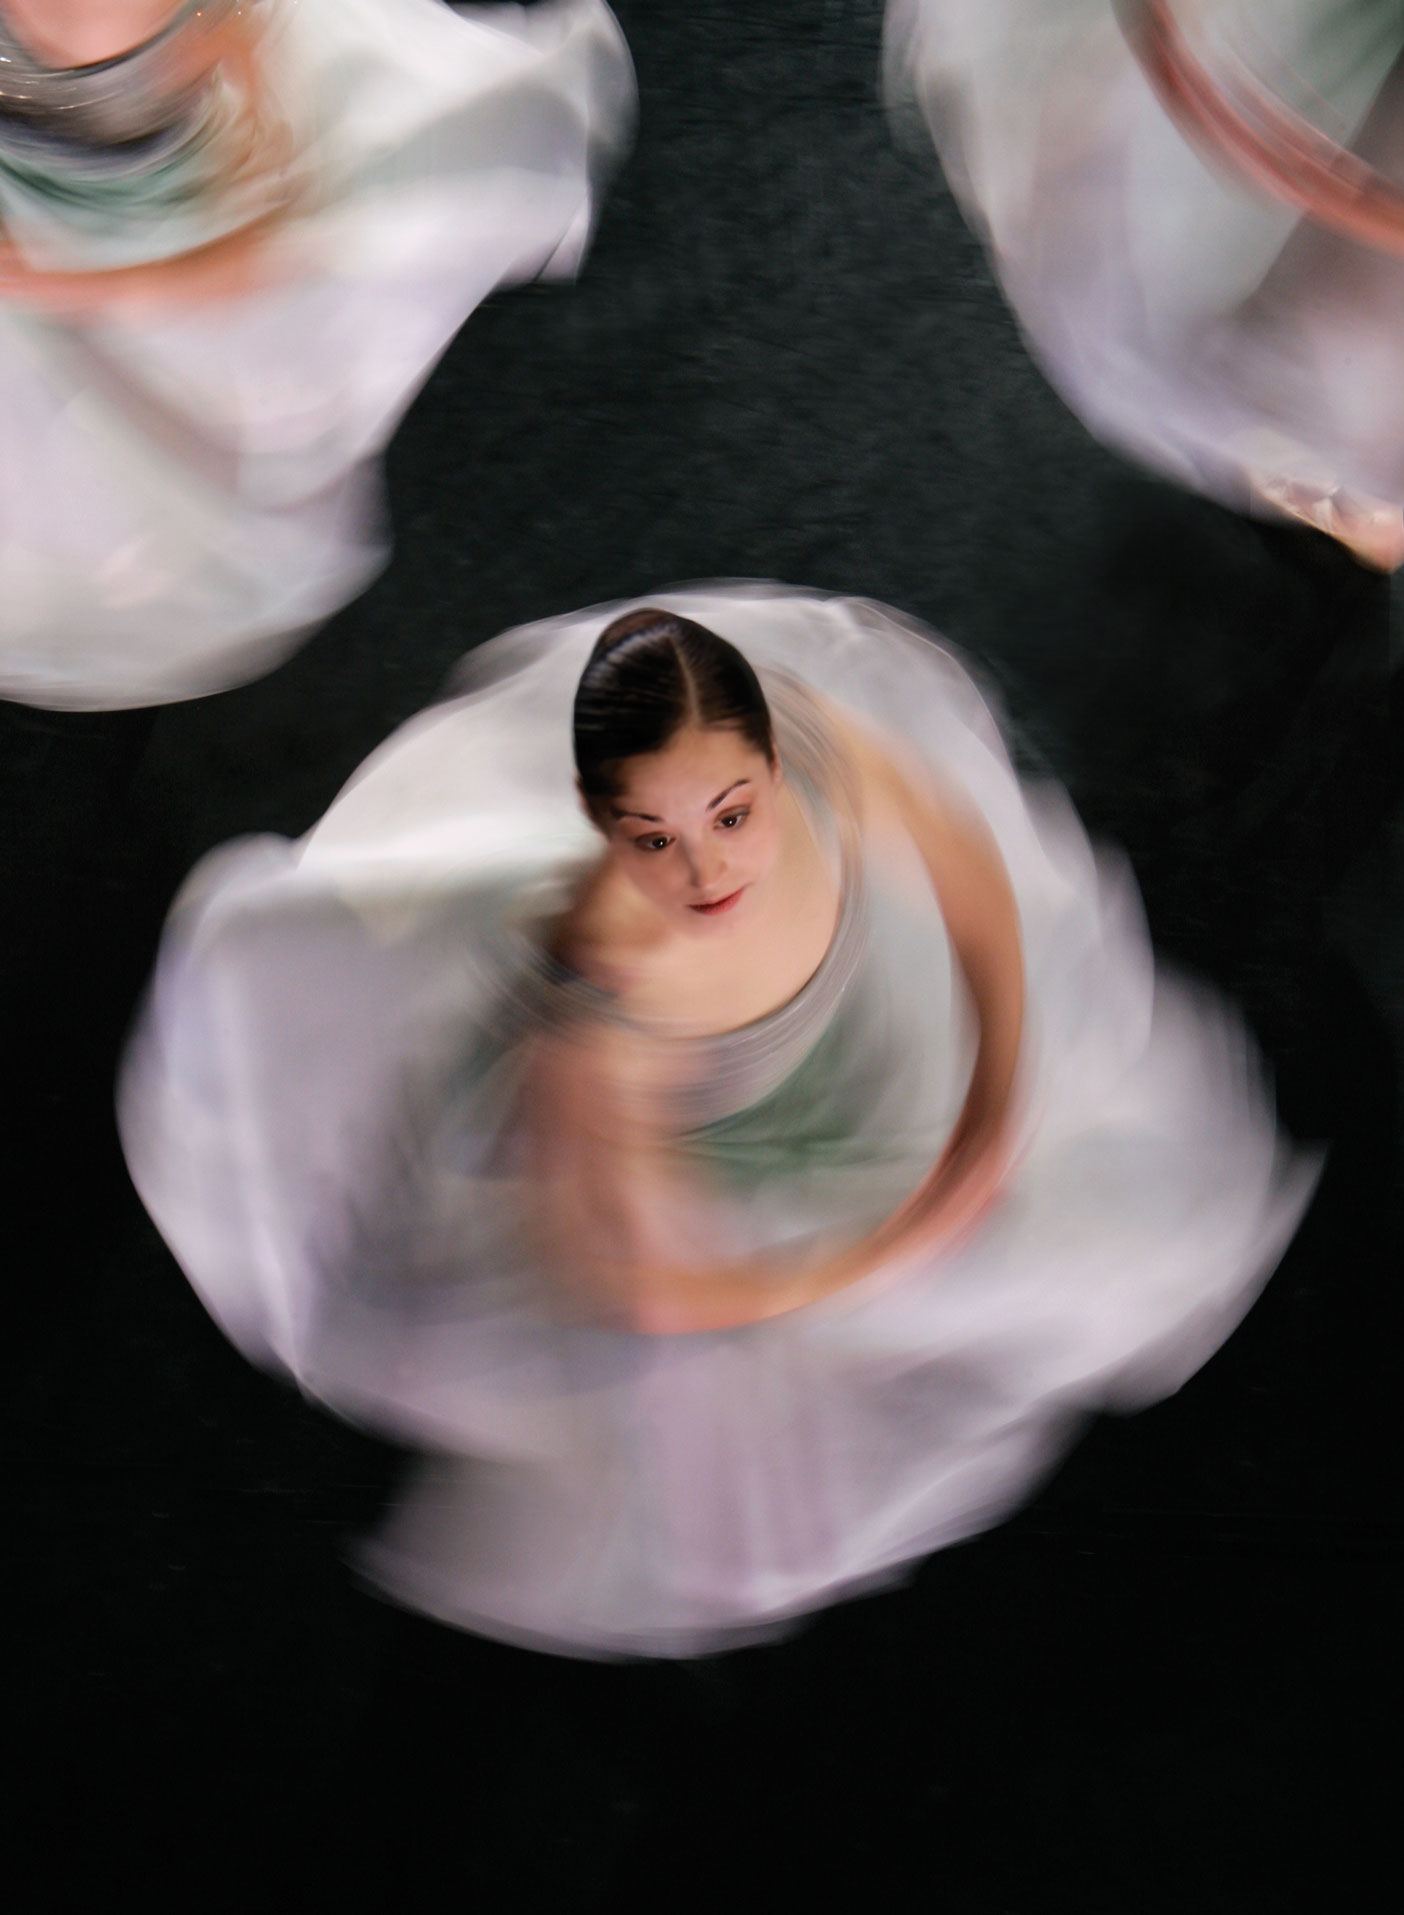 A spinning ballerina, as viewed from above.